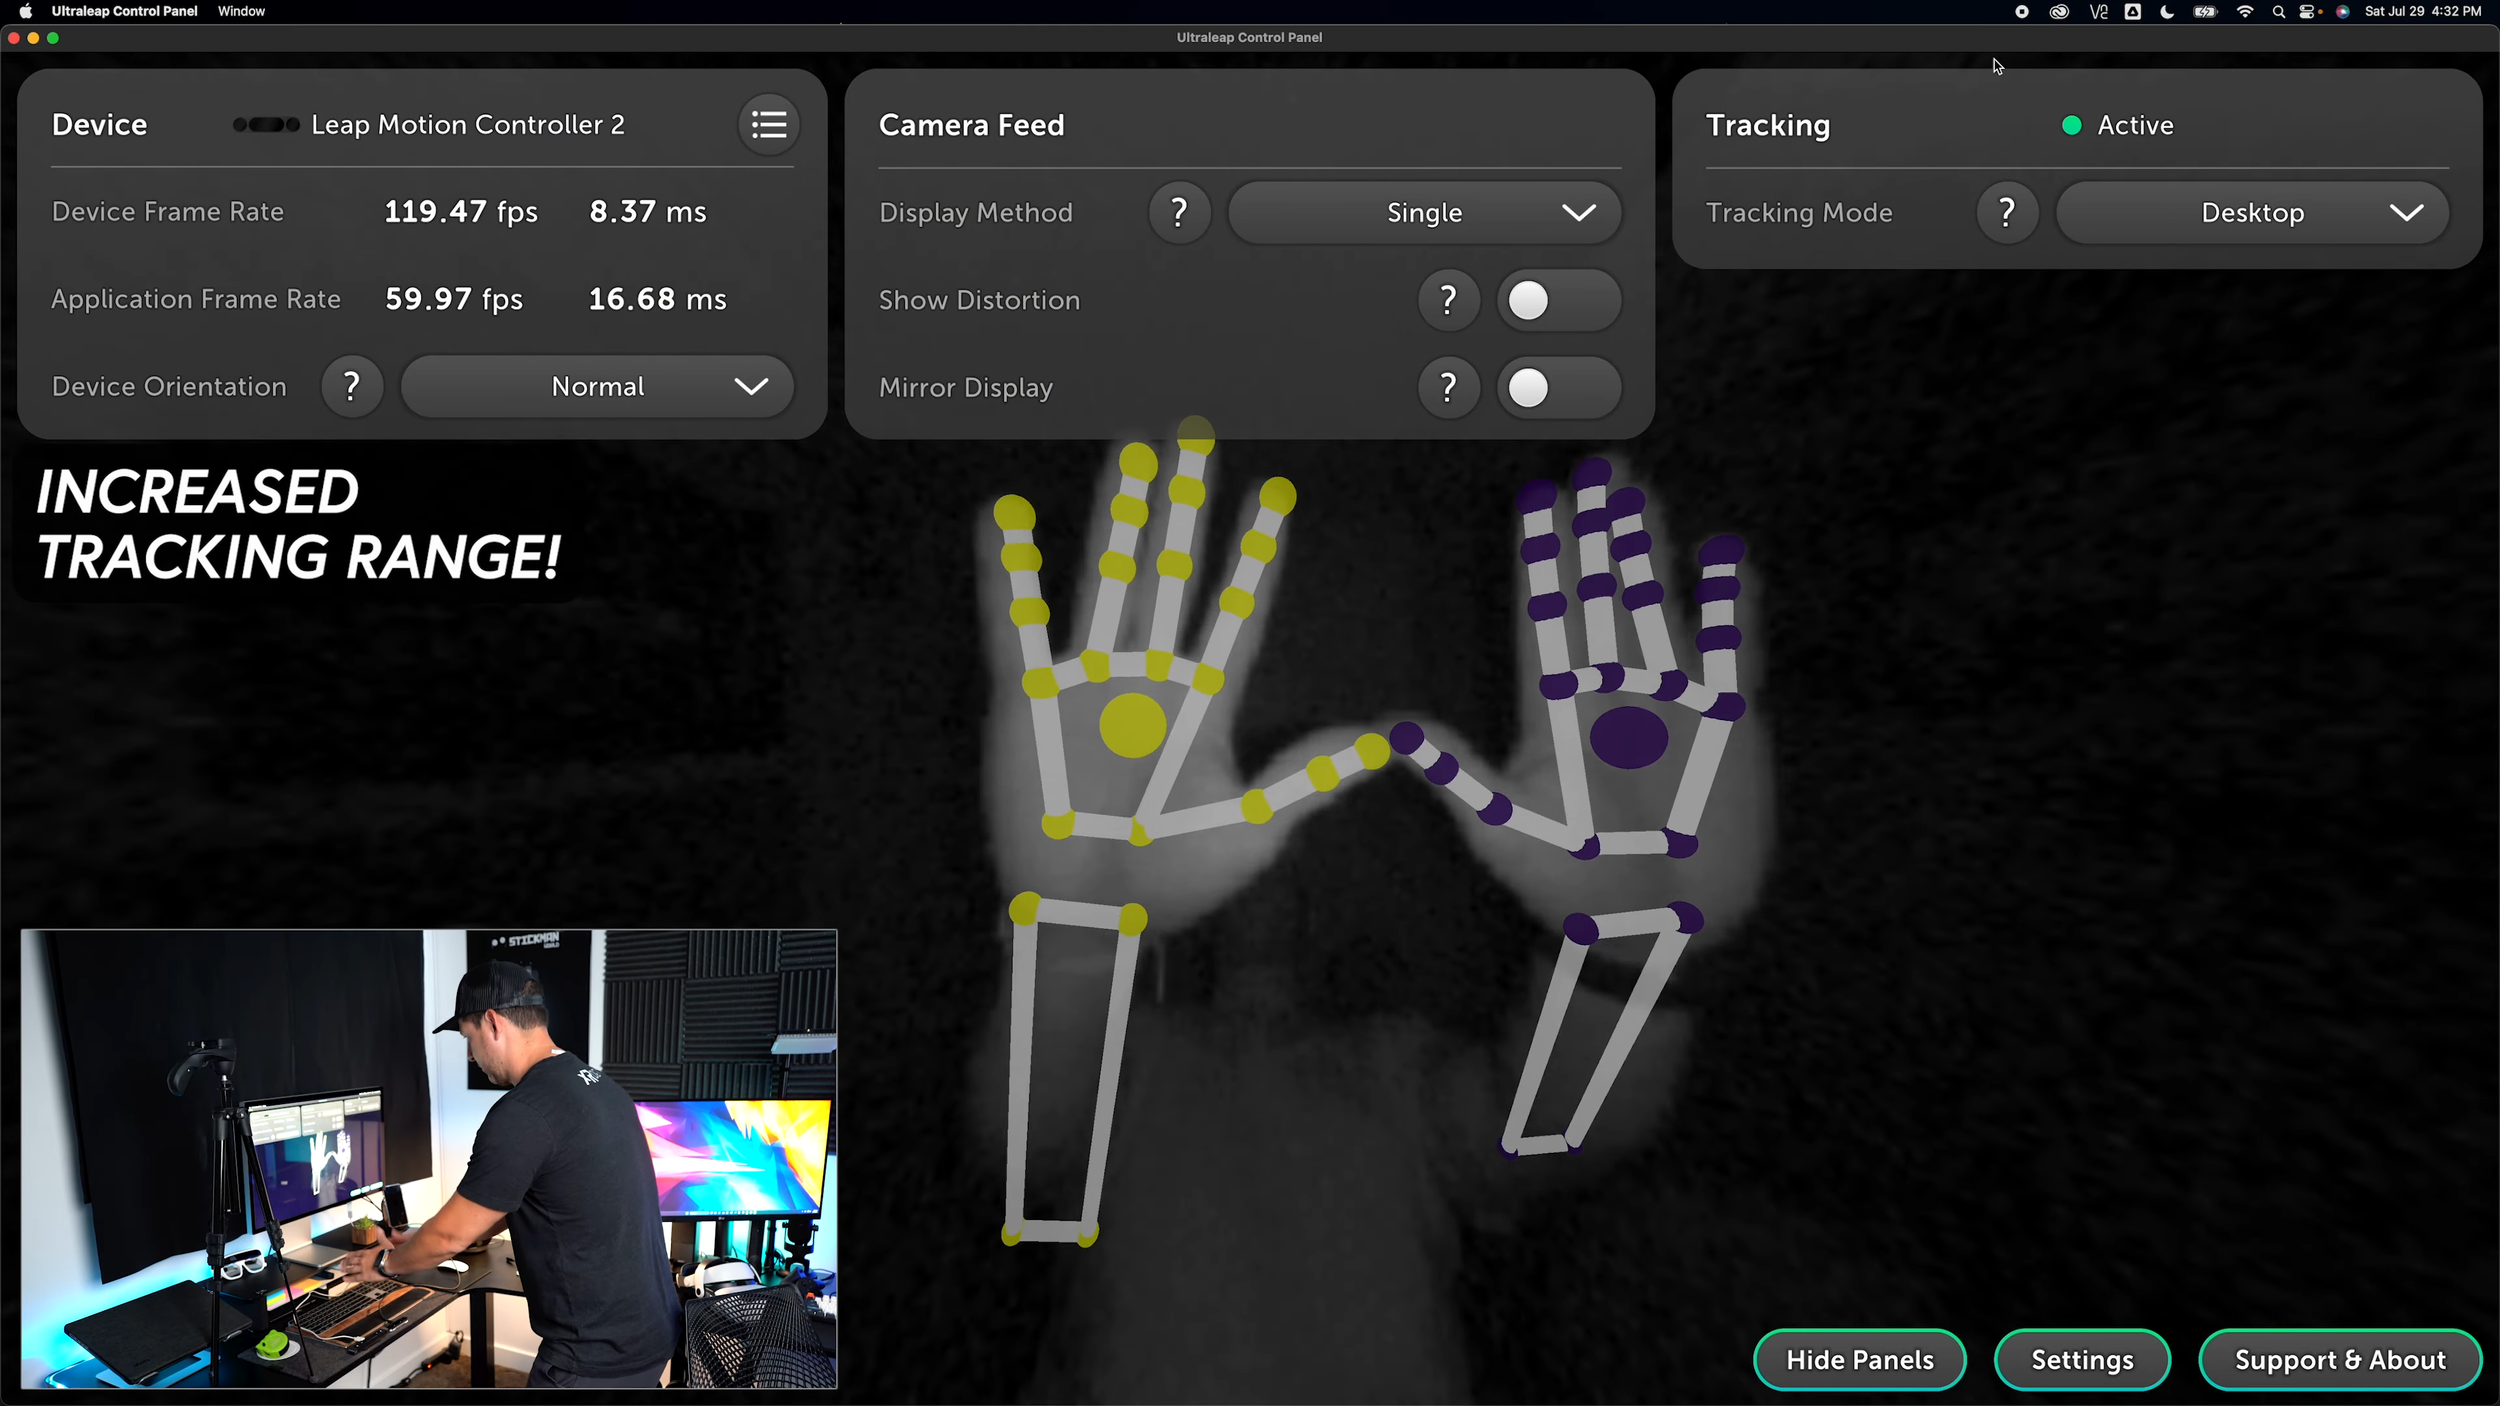 Ultraleap Leap Motion Controller 2 Is Here! (Specs, Demos, & Dev Tools) 0-27 screenshot.png